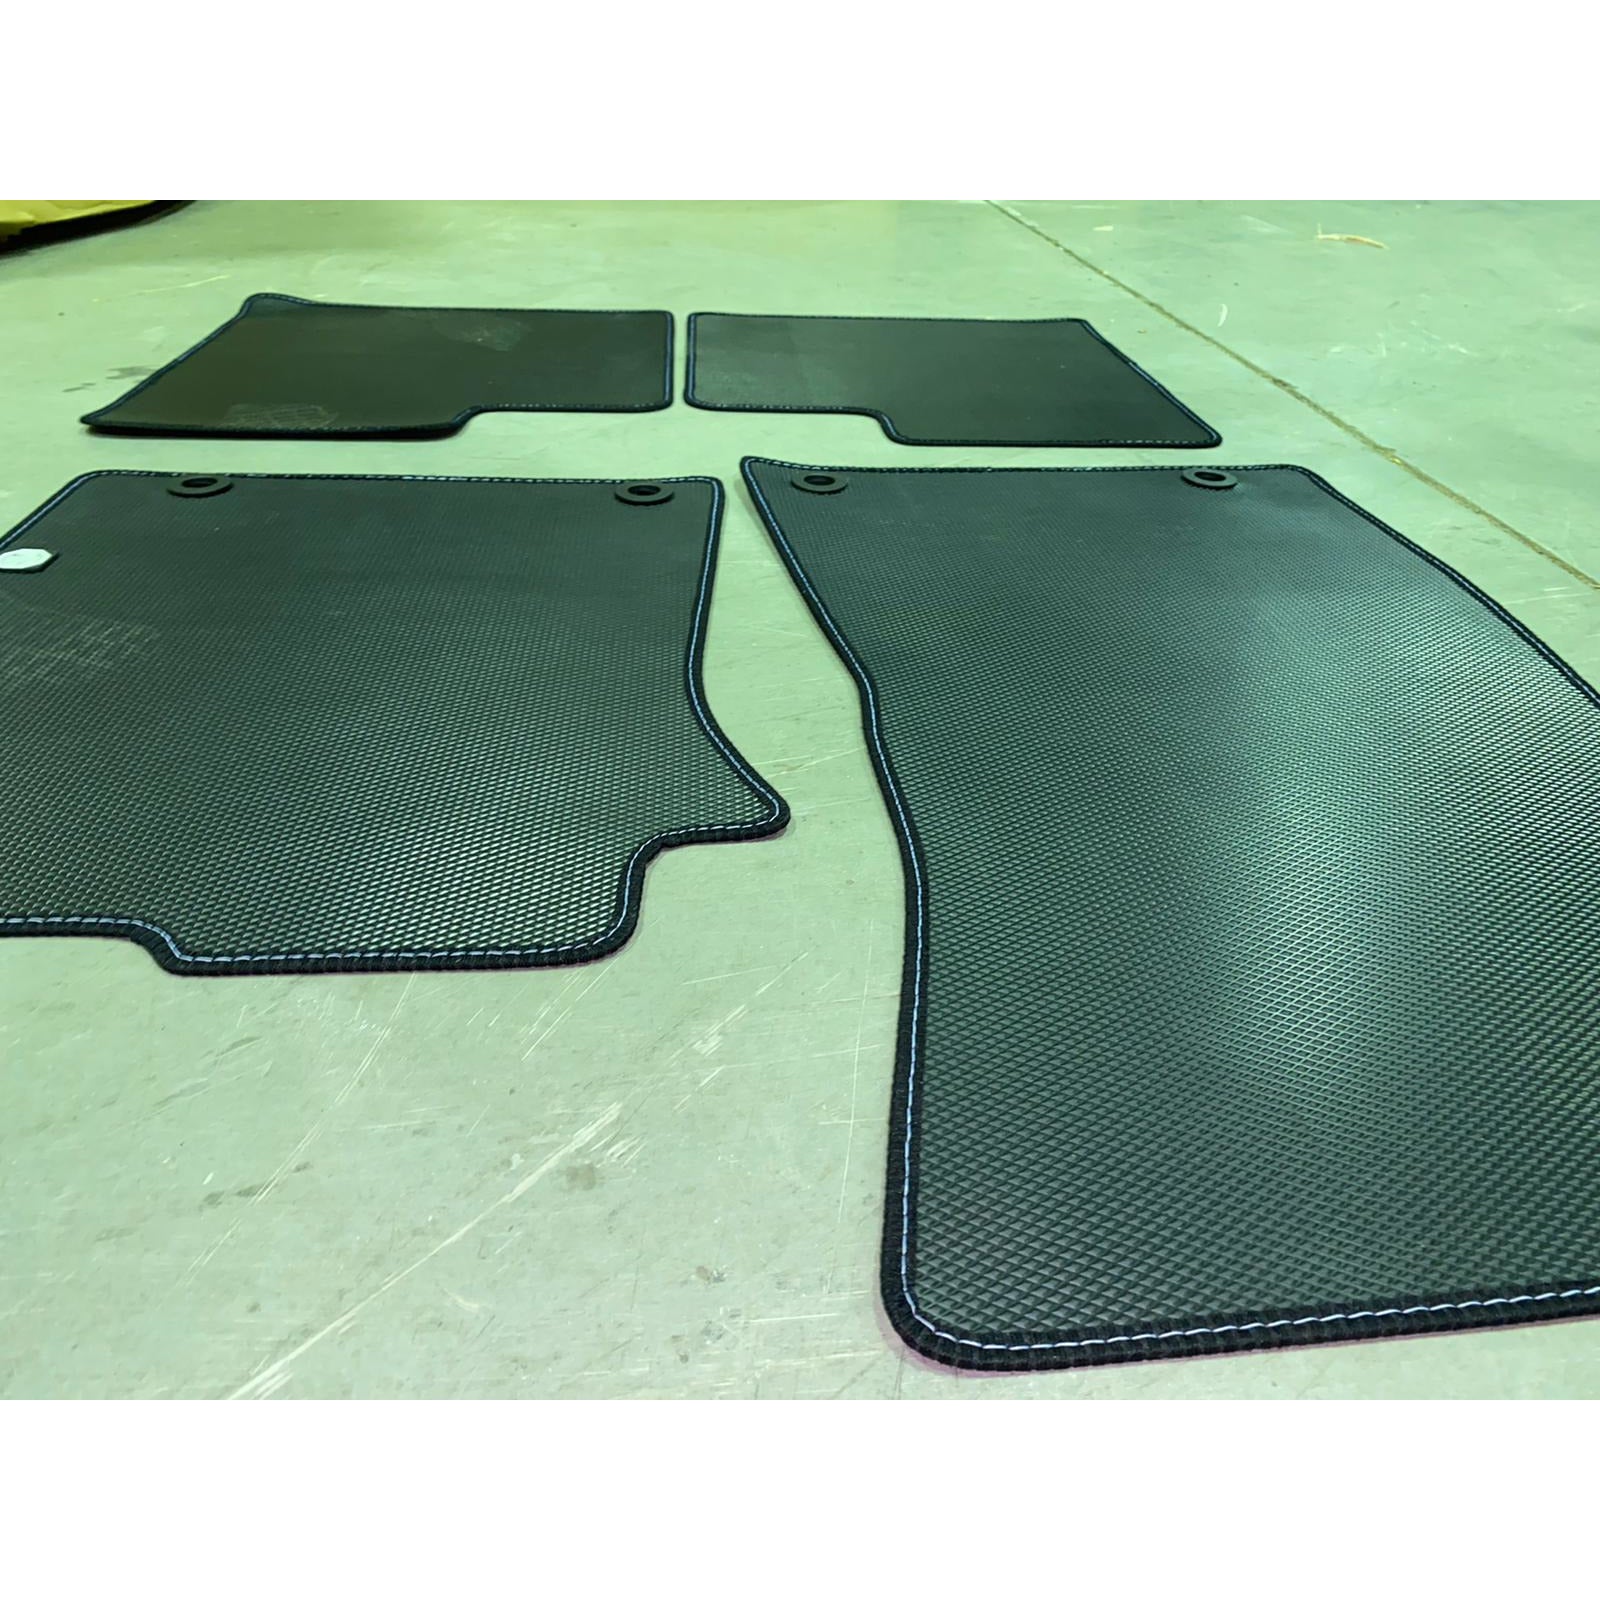 [Brand new] MG ZS 2021 Genuine Carpet Floor Mats - Black With Logo | ARG Parts & Accessories.